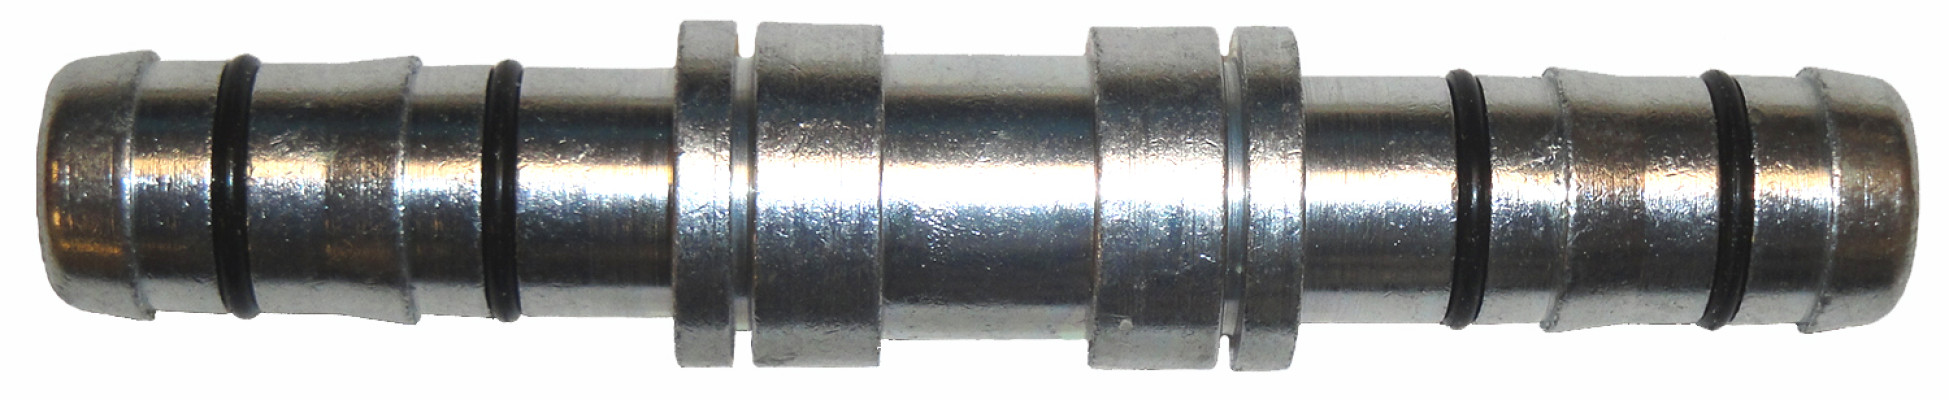 Image of A/C Refrigerant Hose Fitting from Sunair. Part number: FF14253